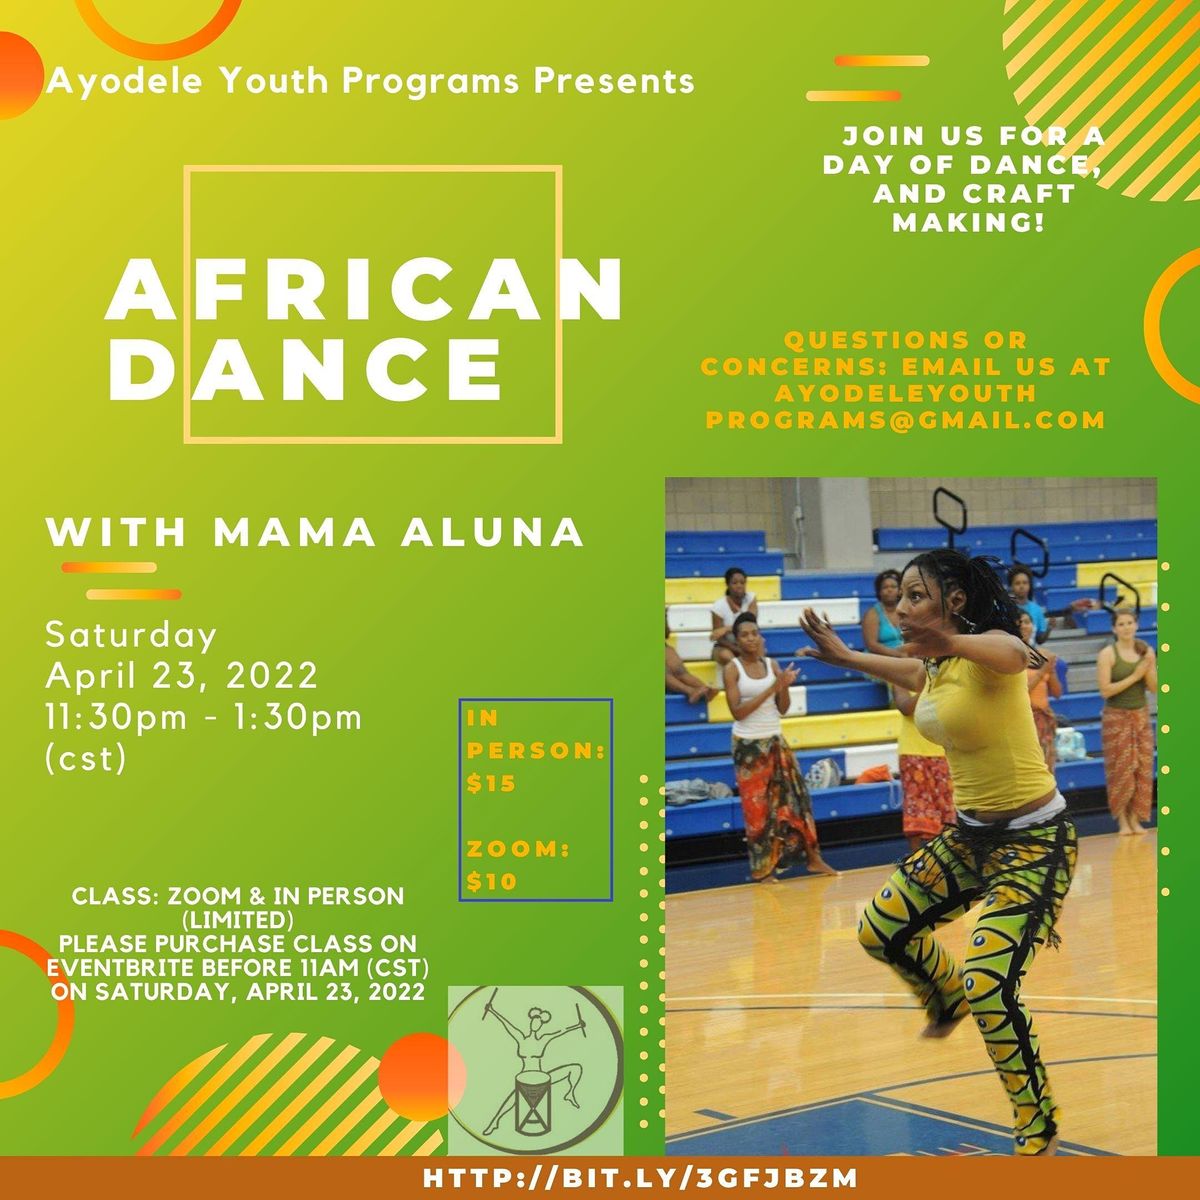 AYODELE YOUTH PROGRAMS PRESENTS....... AFRICAN DANCE WITH MAMA ALUNA